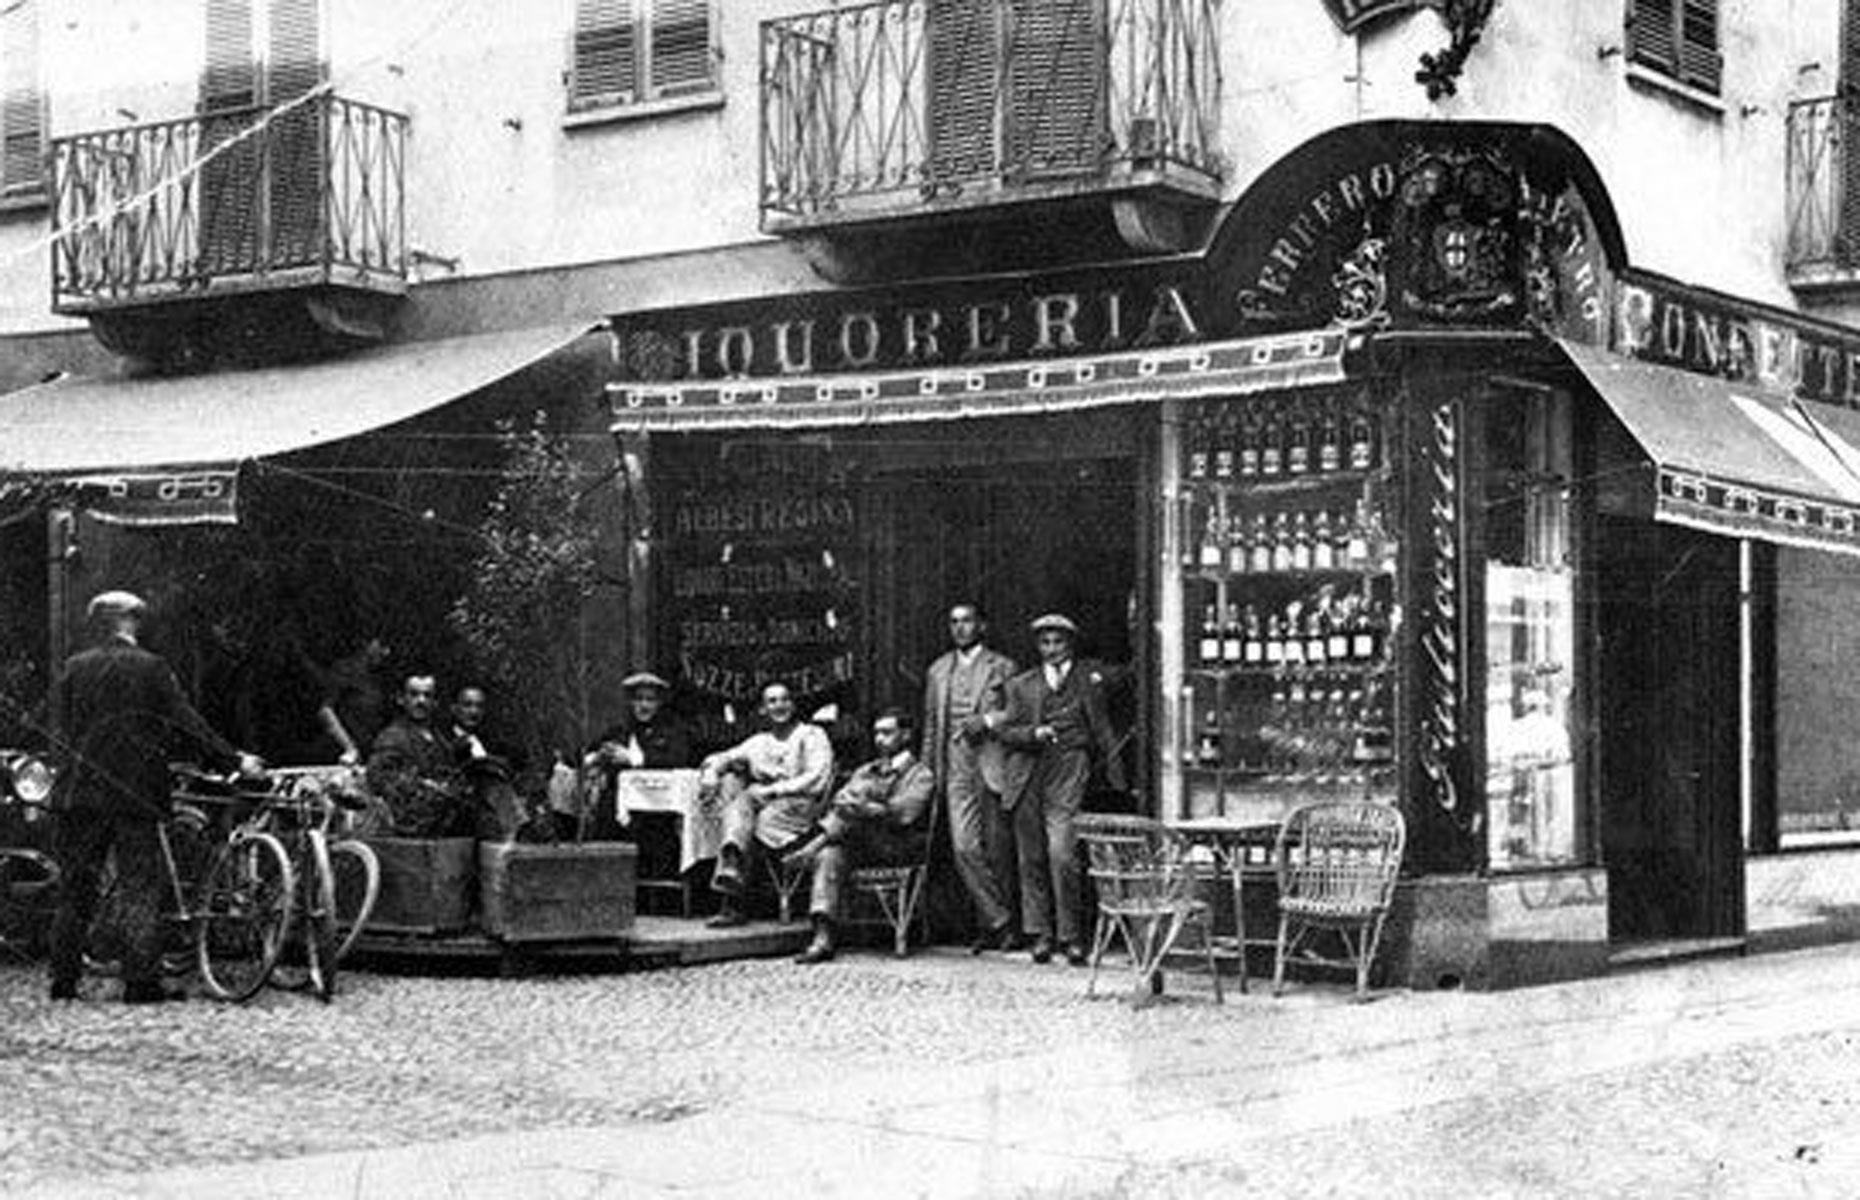 Ferrero started out as a modest liquor, candy and pastry shop